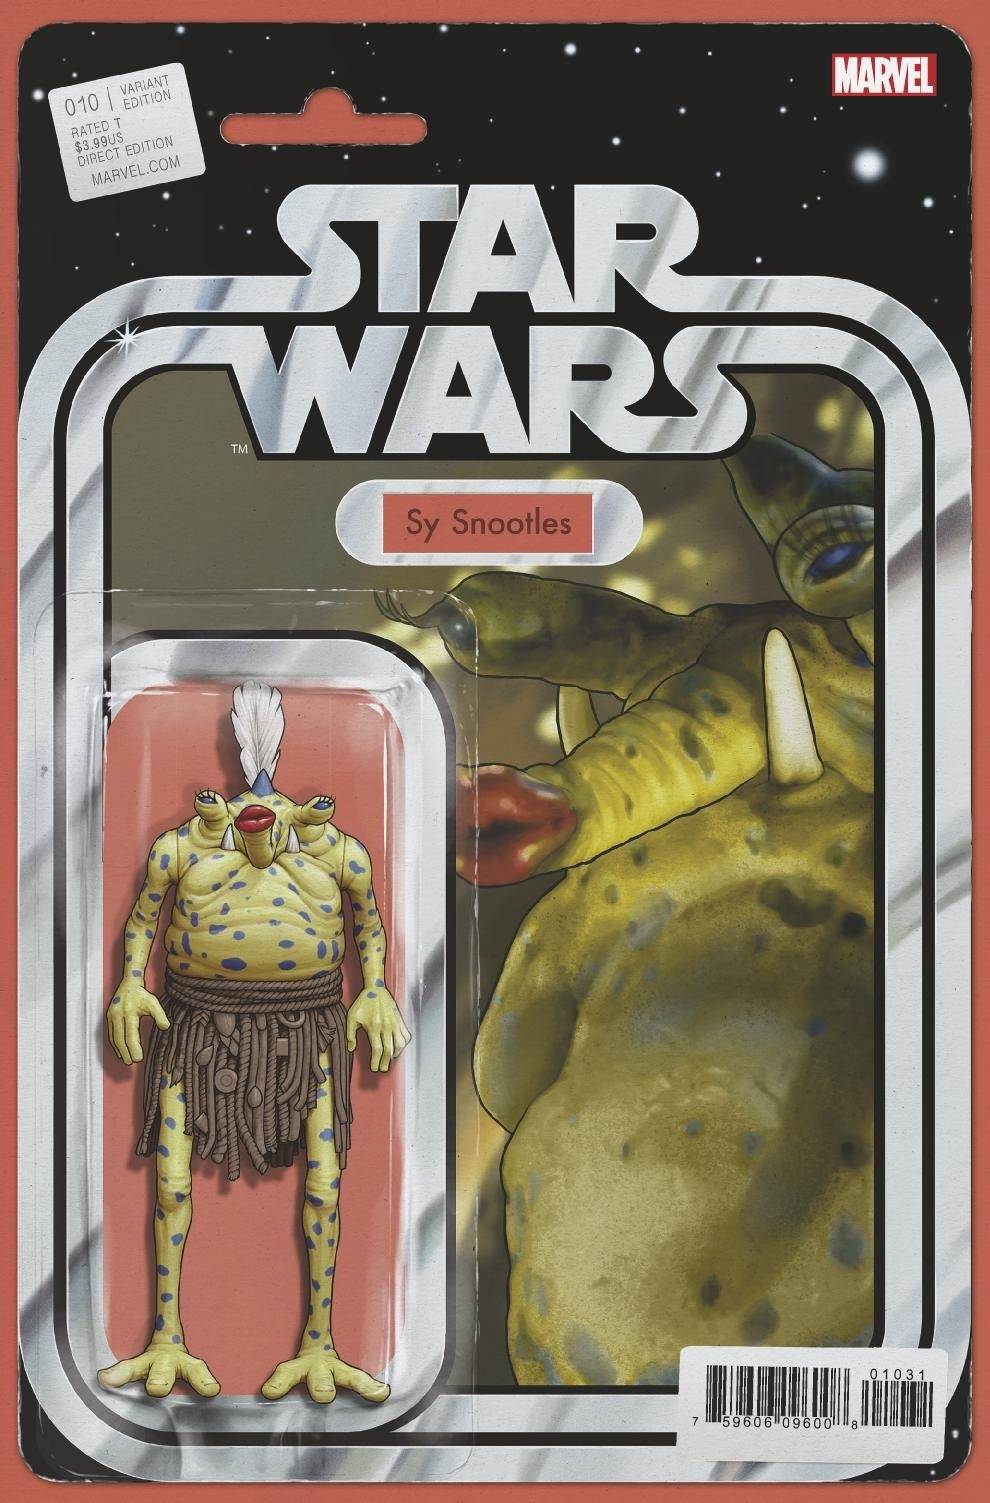 Star Wars #10 ("Sy Snootles" Action Figure Variant Cover) (06.01.2021)